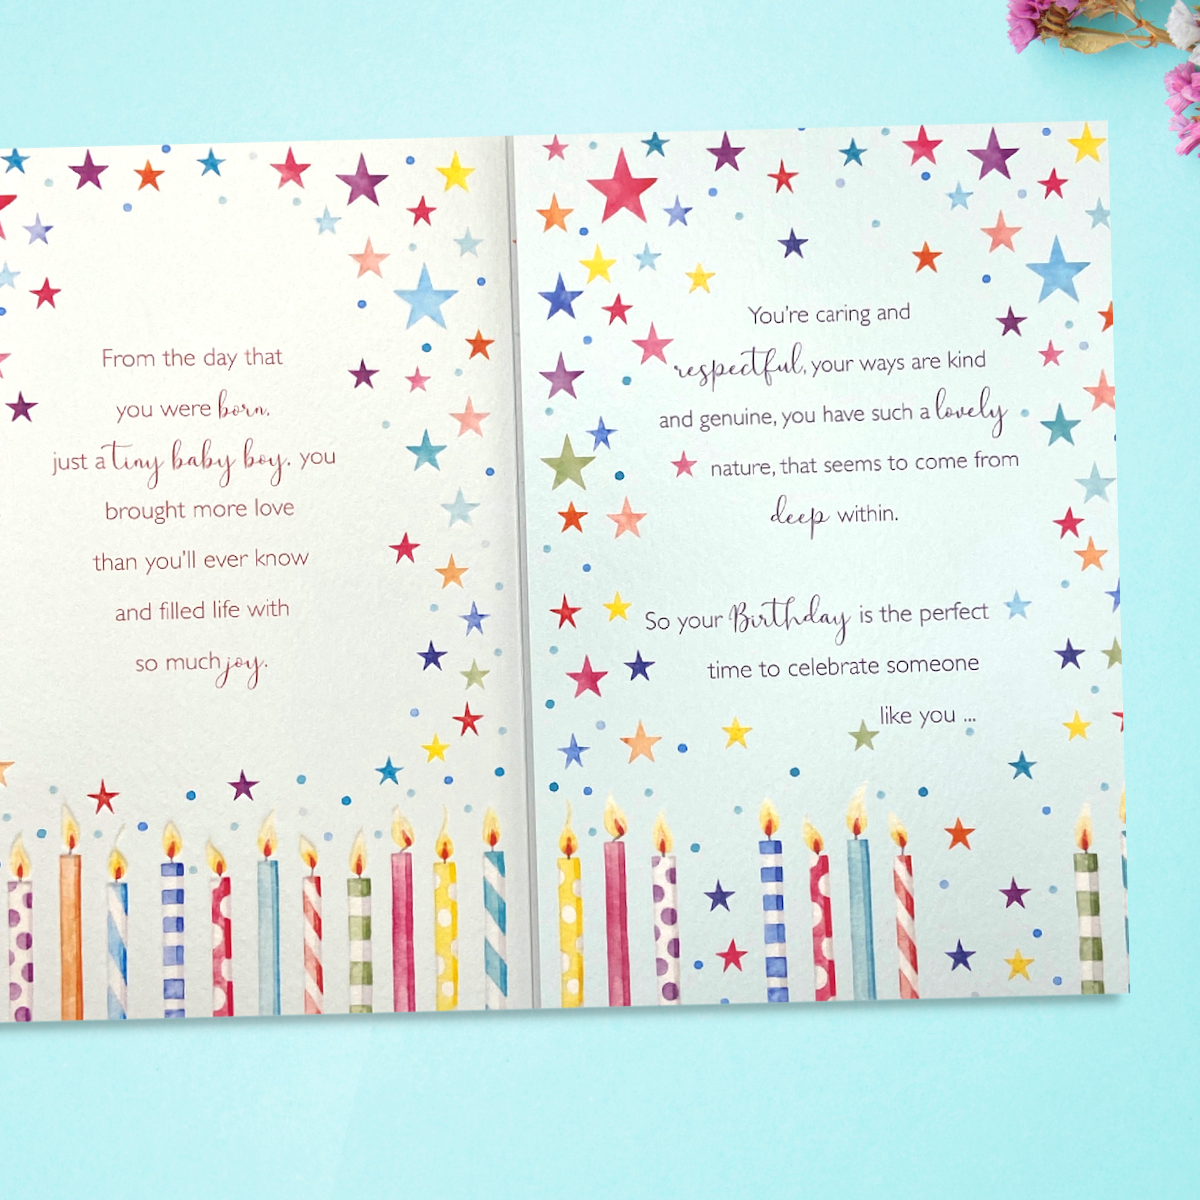 Inside image with two pages with stars, candles and verse